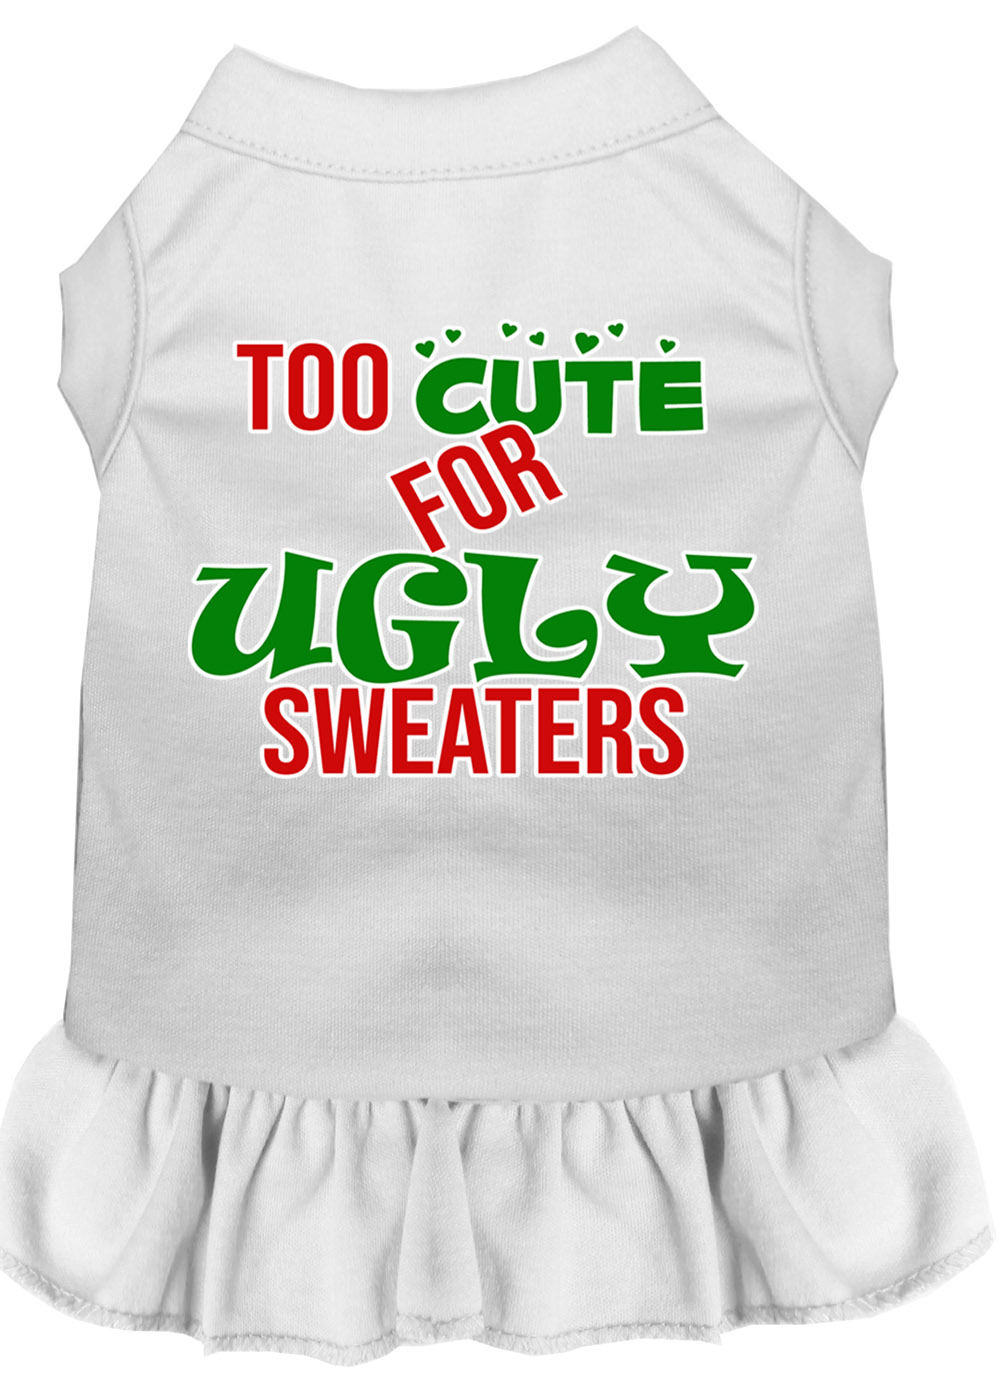 Too Cute for Ugly Sweaters Screen Print Dog Dress White XL